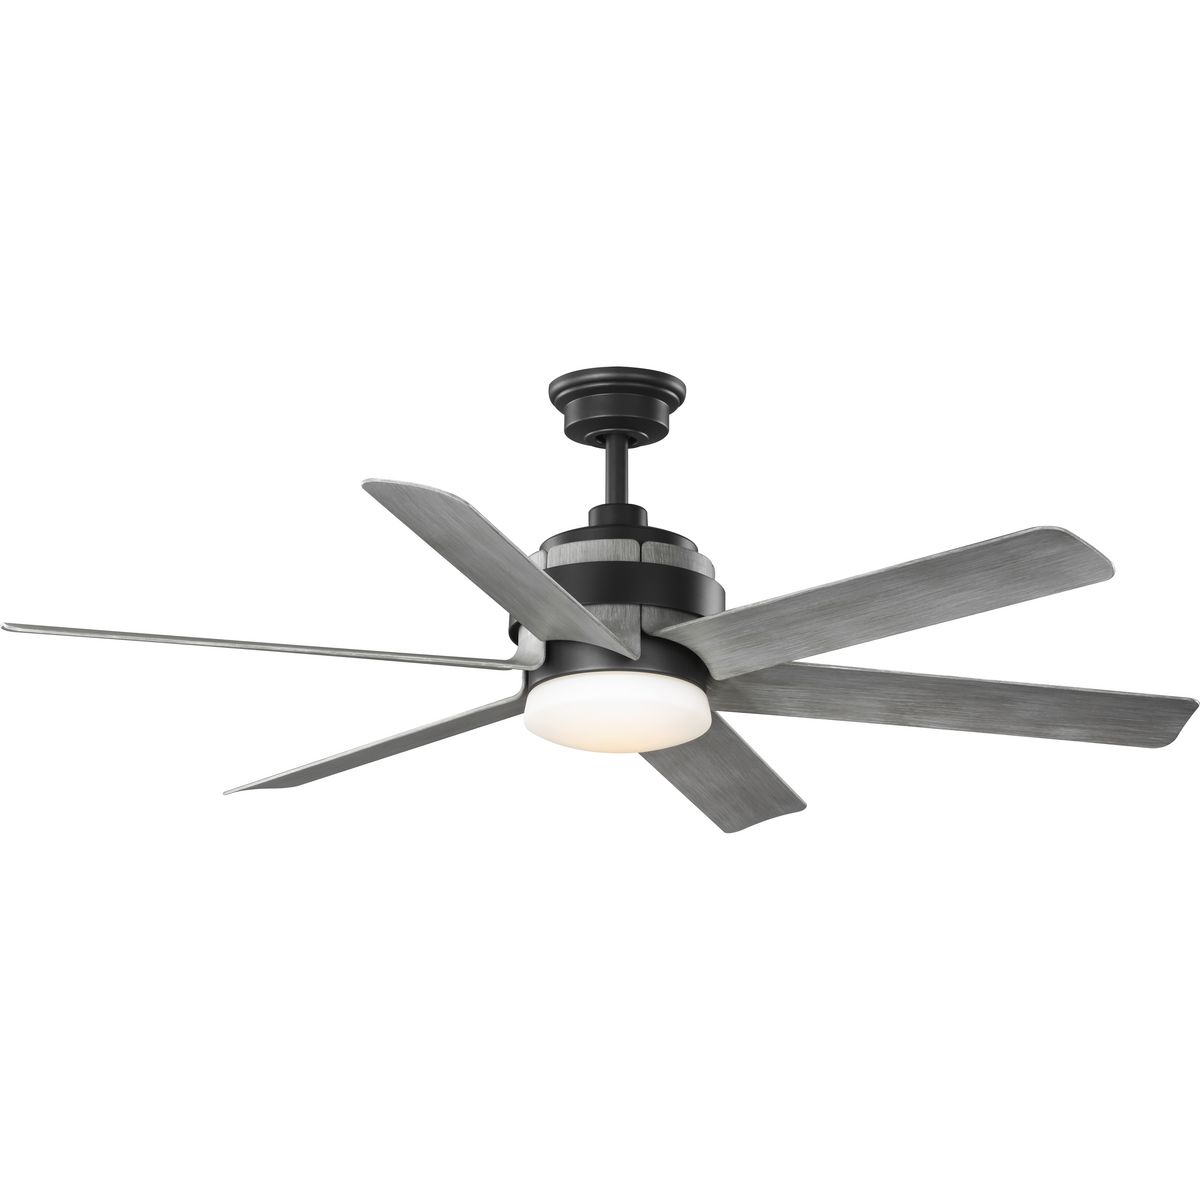 Kaysville Collection 6 Blade Grey Weathered Wood 56 Inch Dc Motor Led Urban Industrial Ceiling Fan P250003 143 30 Progress Lighting